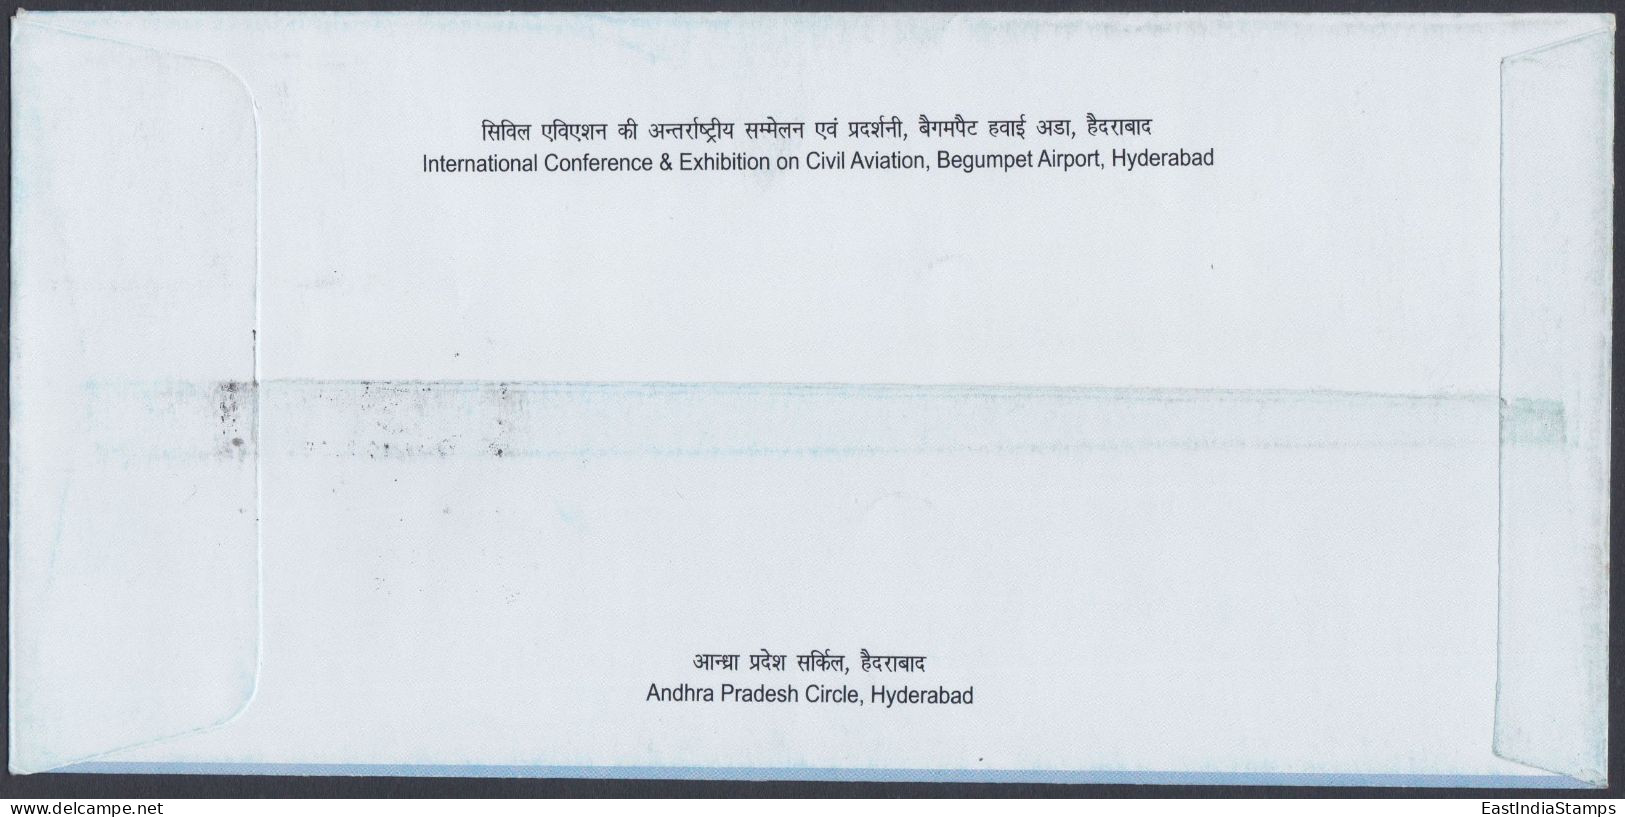 Inde India 2008 Special Cover Aviation, Aeroplane, Aircraft, Airplane, Jet, Airport, Pictorial Postmark - Covers & Documents